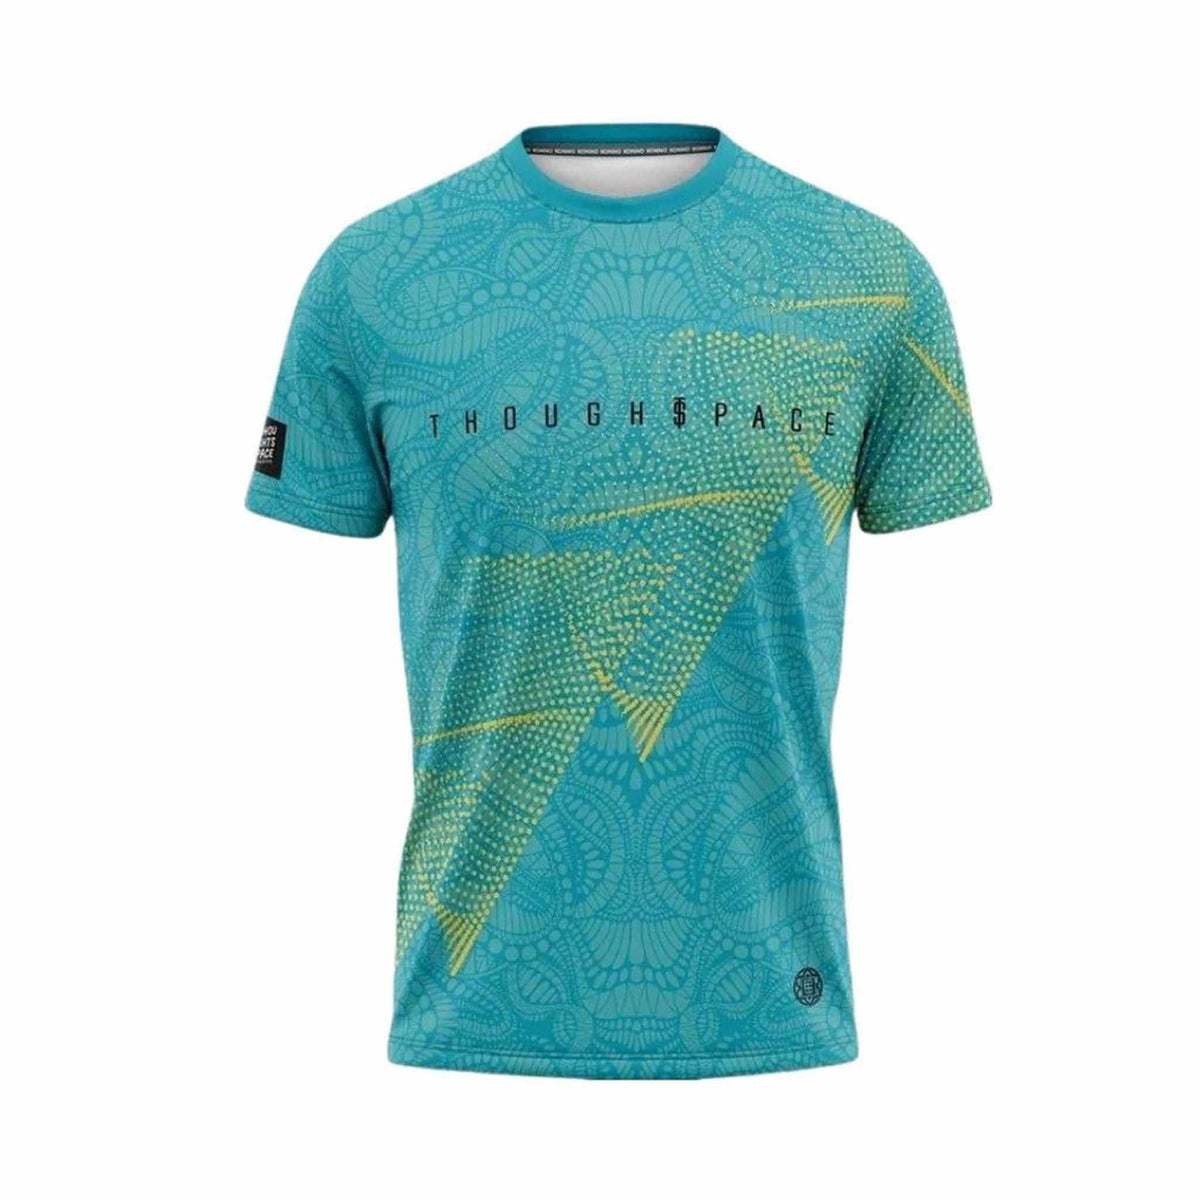 Thought Space Athletics Digi Tribal - Teal Jersey